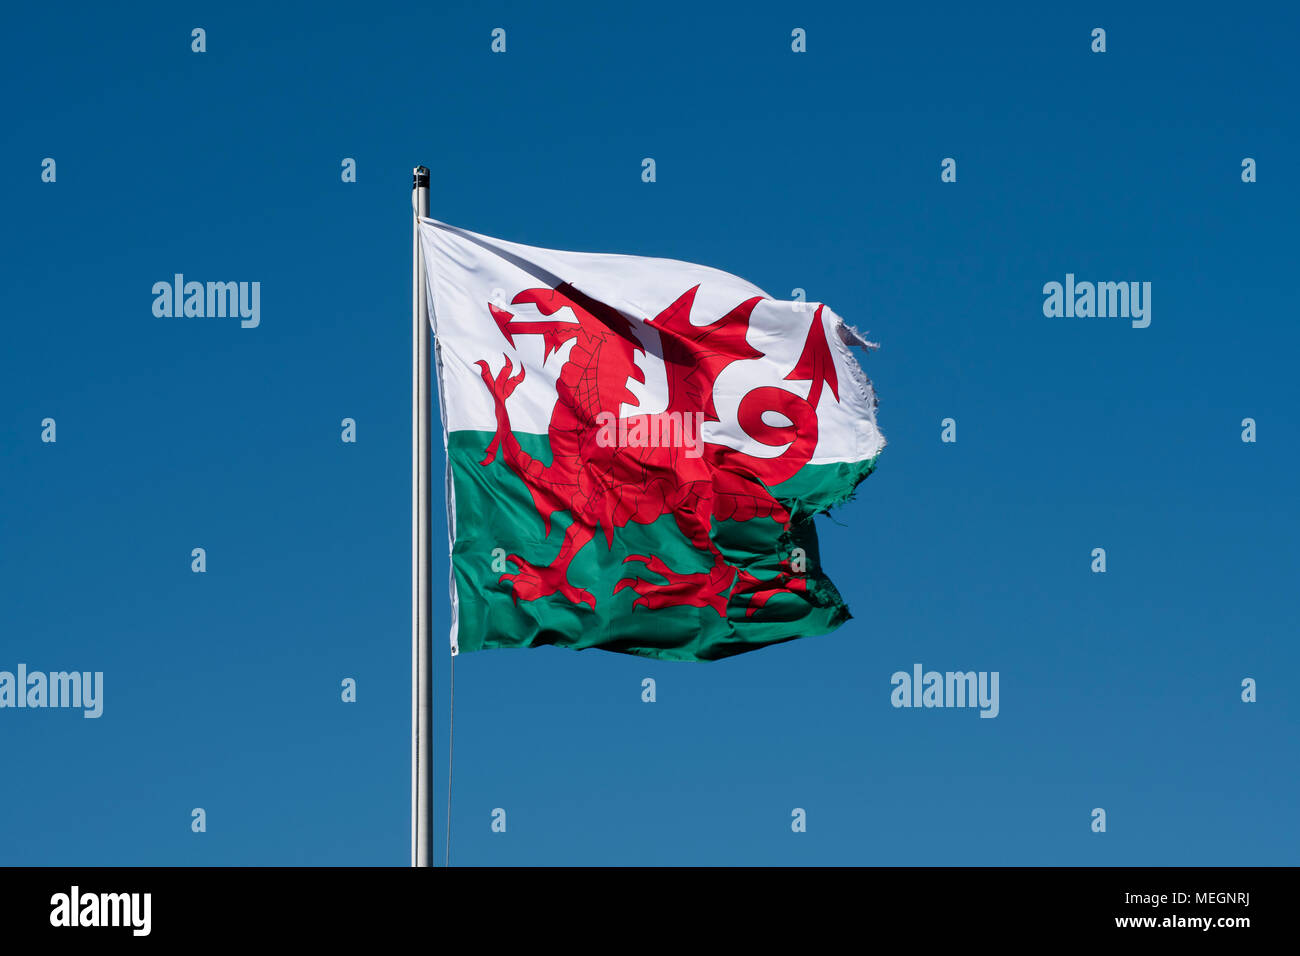 Y Ddraig Goch - The Red Dragon, the National Flag of Wales, a country in the United Kingdom flutterin in the breeze on a sunny day.. Stock Photo